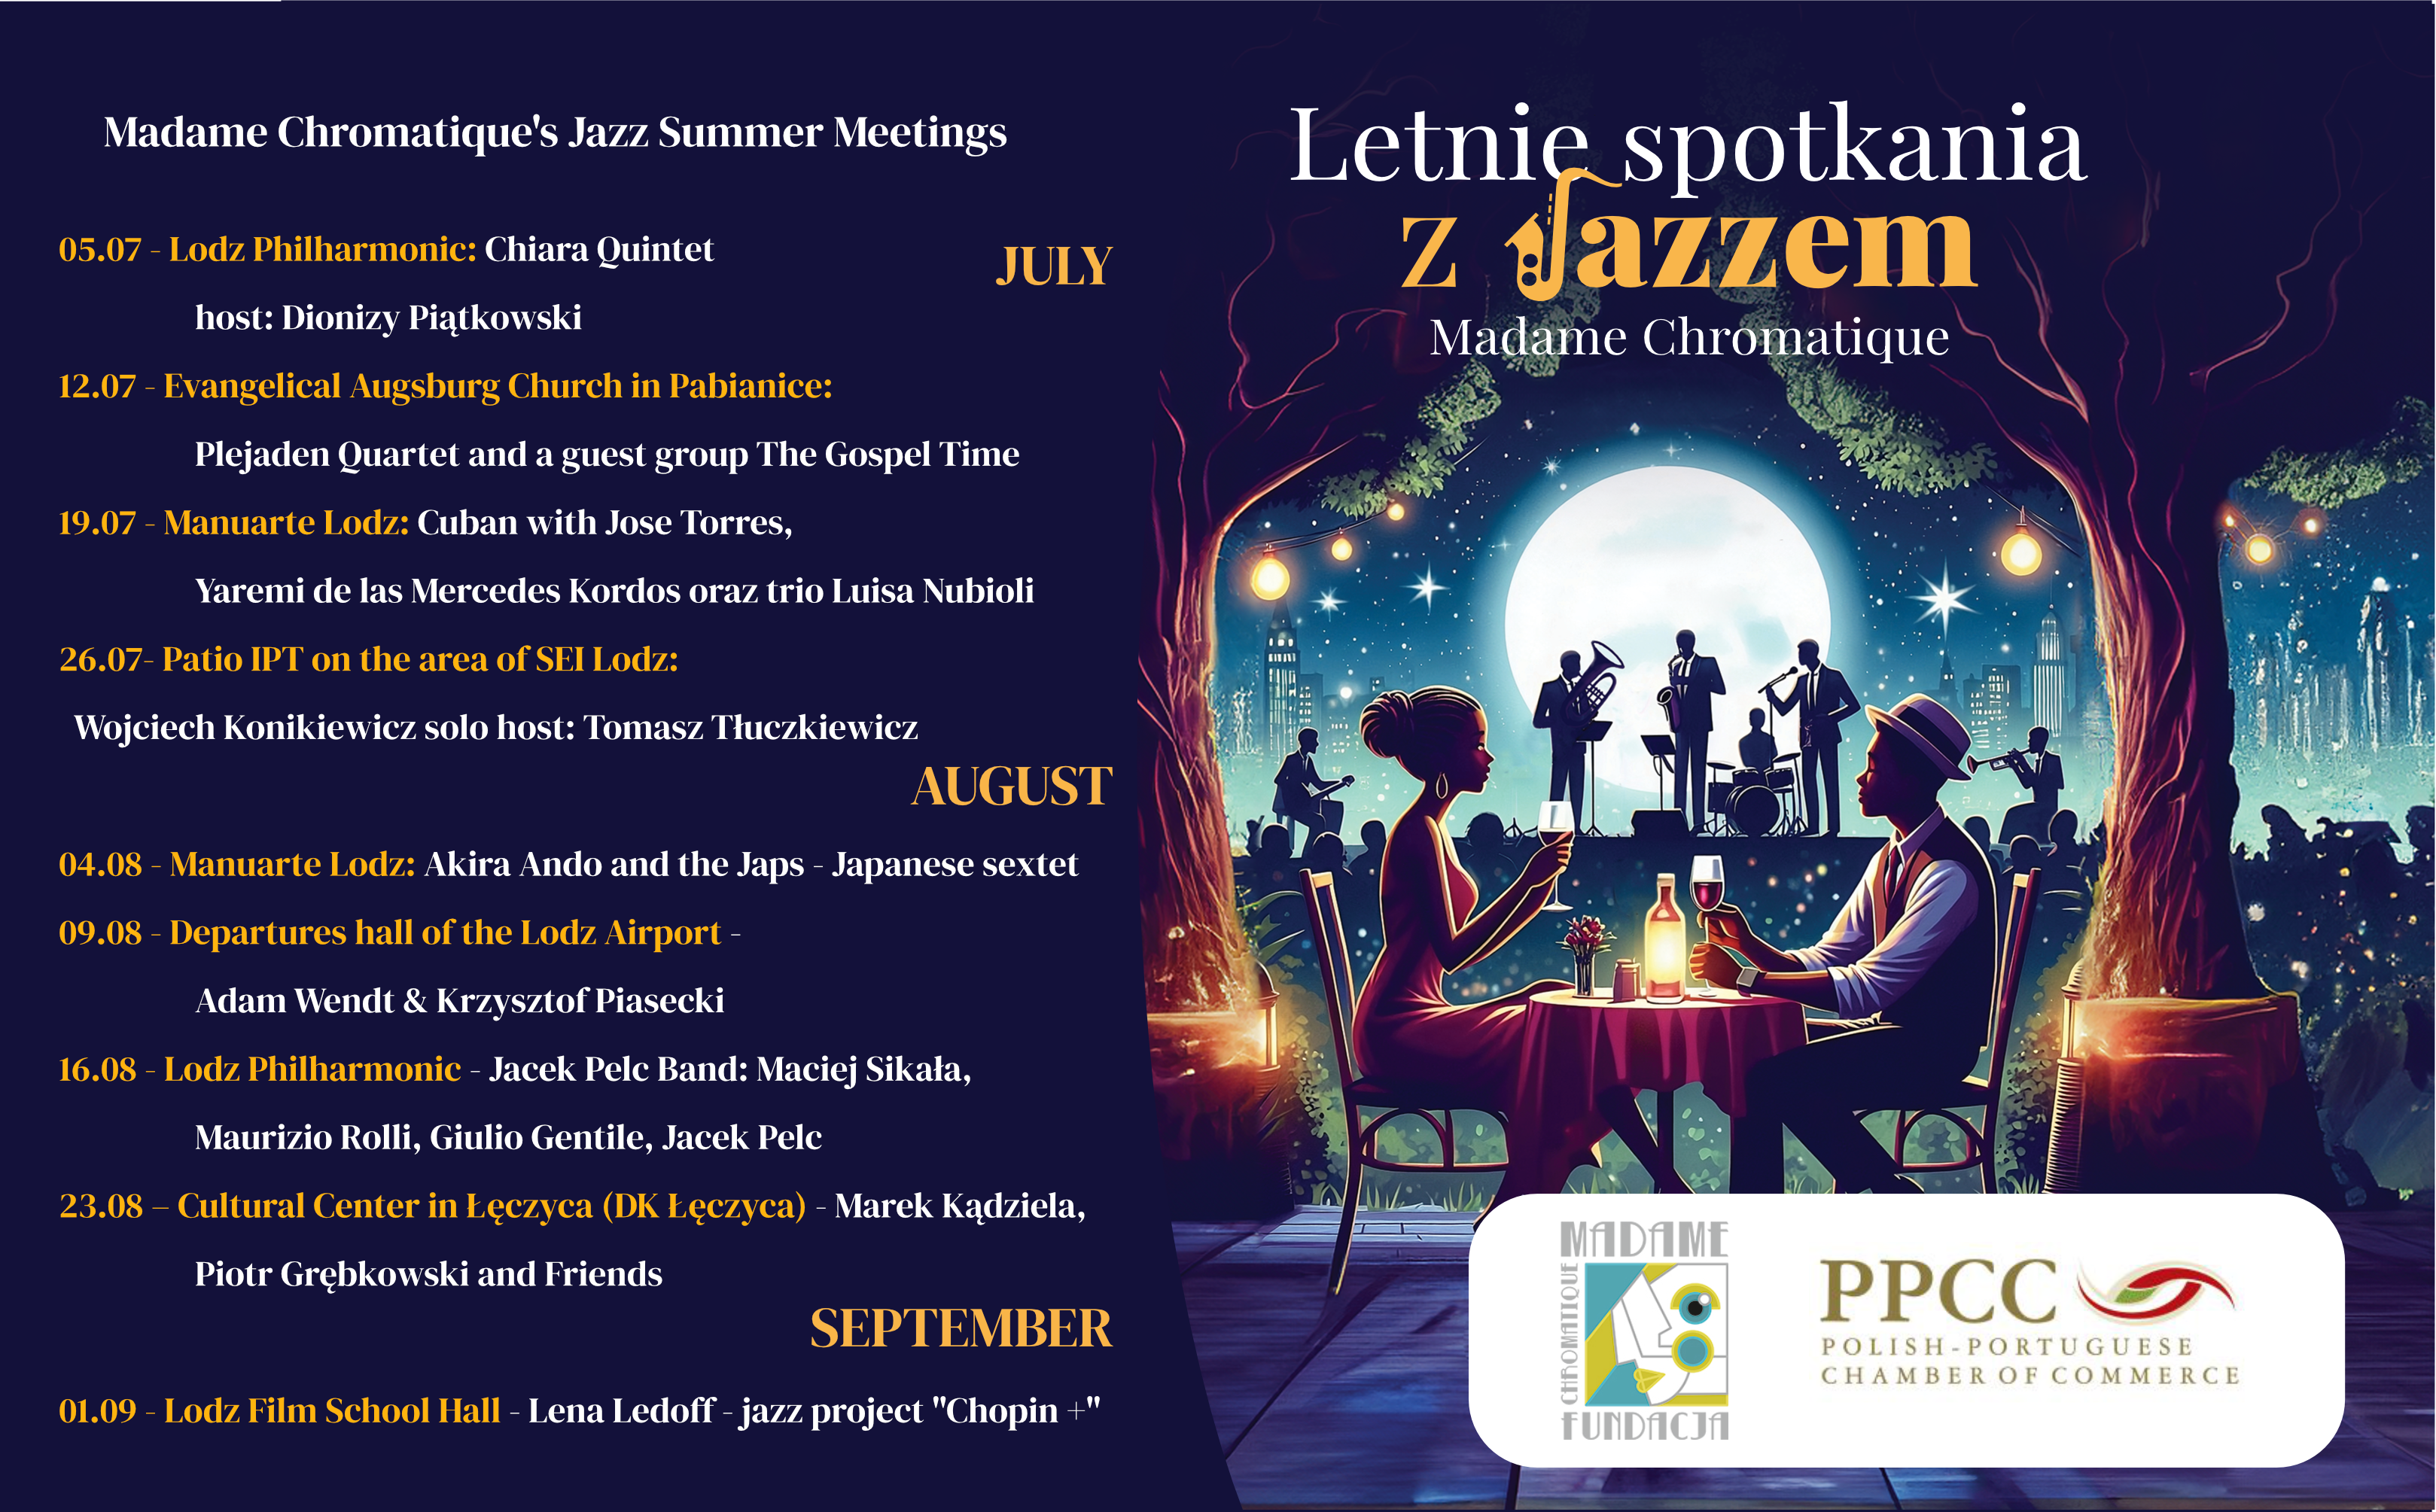 Invitation: Jazz Summer Meetings - a charity project of 9 jazz concerts organized by Madame Chromatique Foundation.